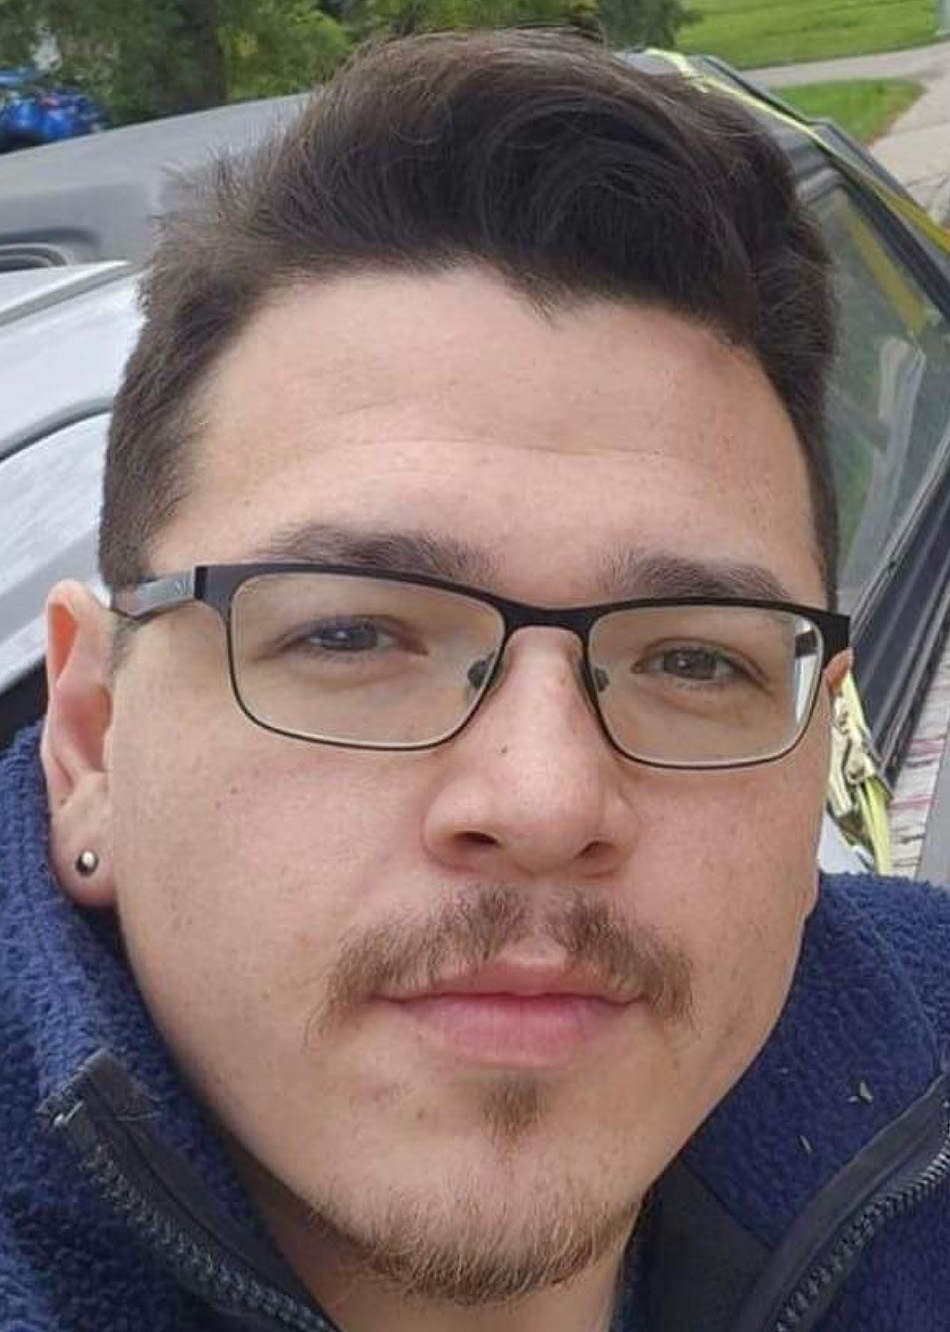 Alfred Anderson, 29, was reported missing from Kinosao Sipi First Nation on June 30. Norway House RCMP say he may have been in the Swan River area around July 4.